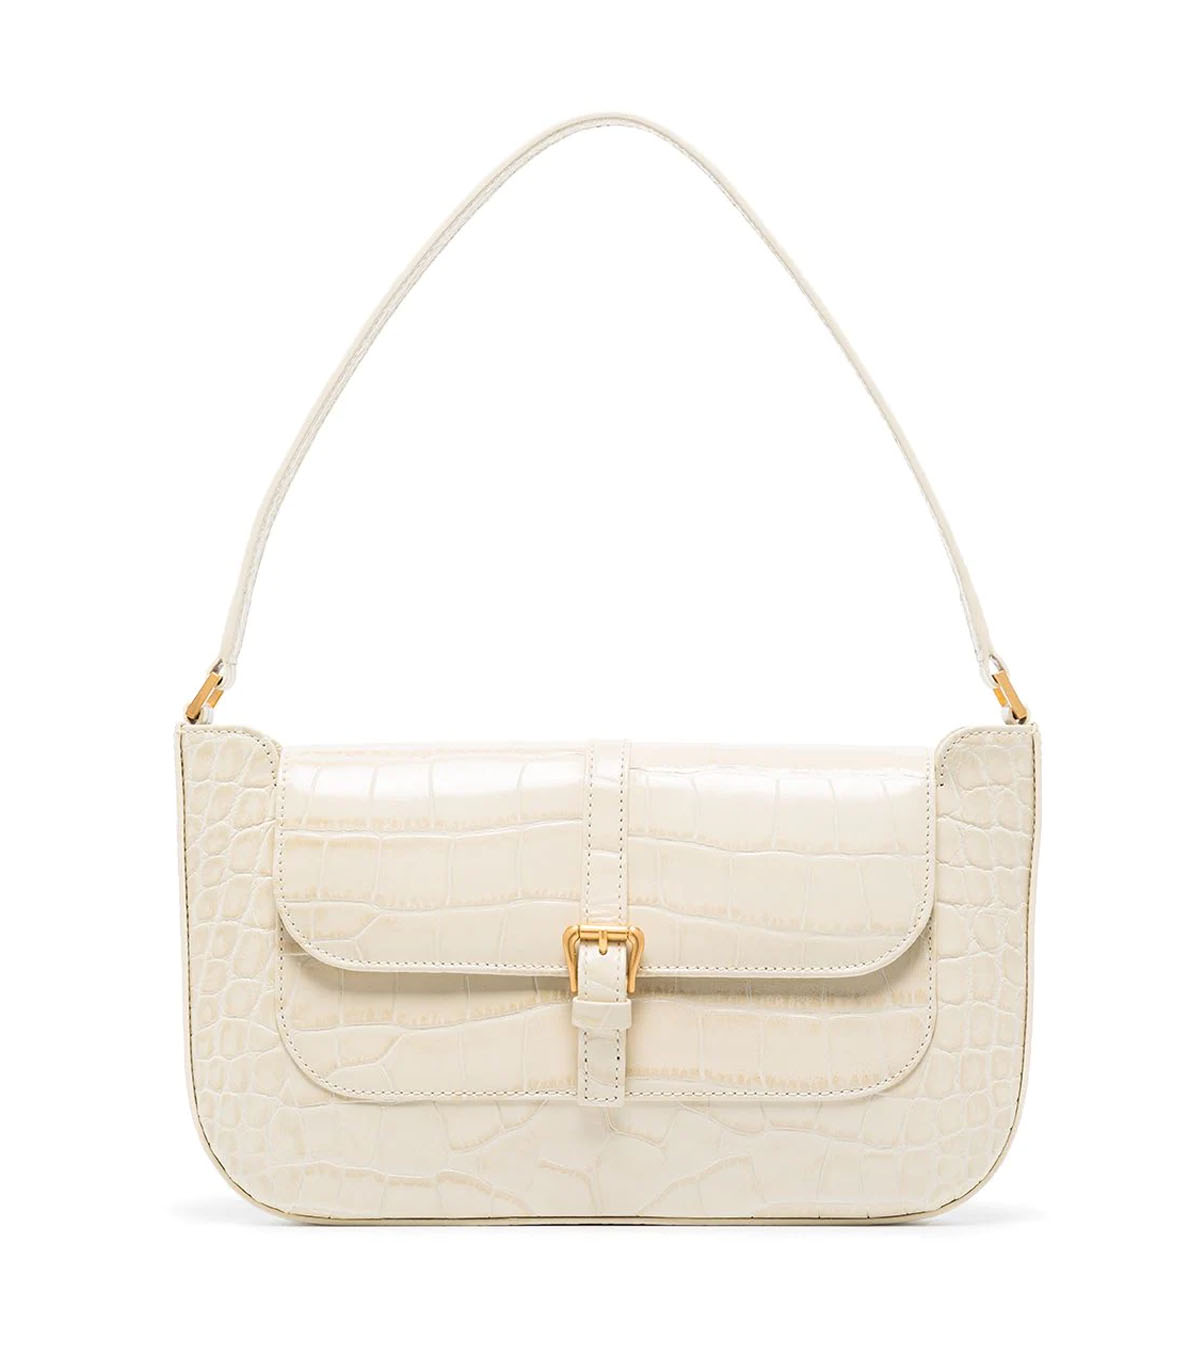 THE BEST *LUXURY HANDBAGS* Under £2500 To Consider For Your